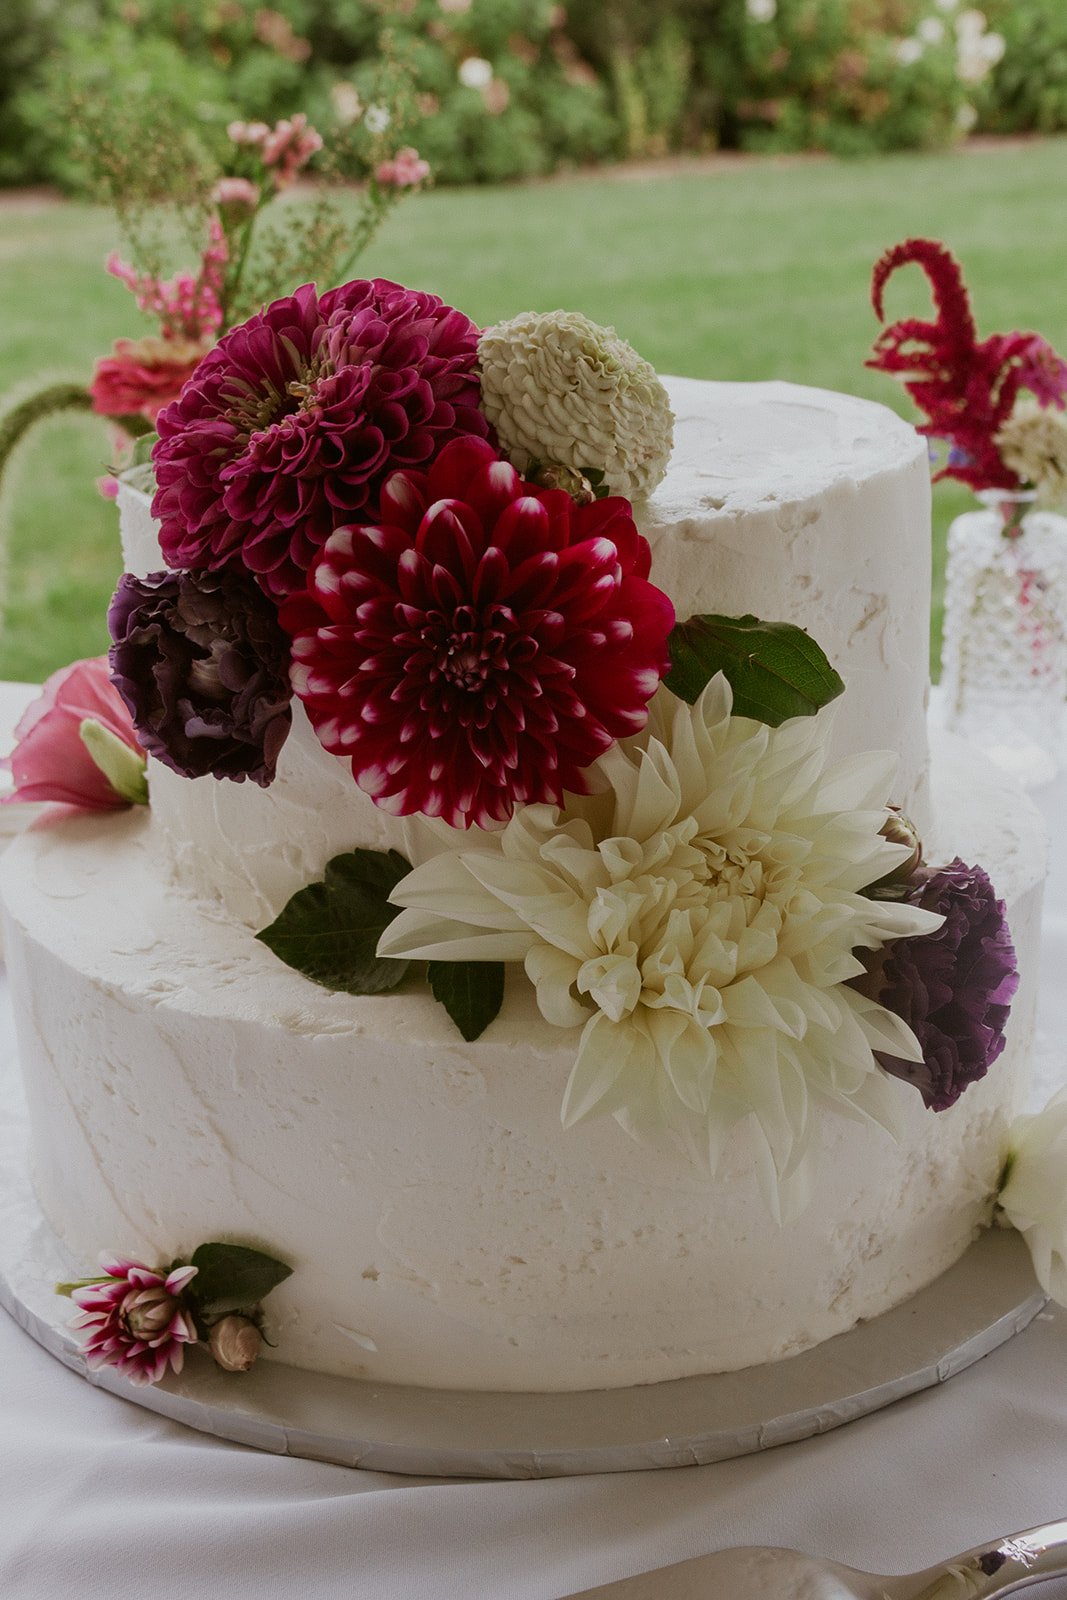 The wedding cake decorated in the bridal florals. A beautiful sleek white cake with bright fuchsia and ivory florals.